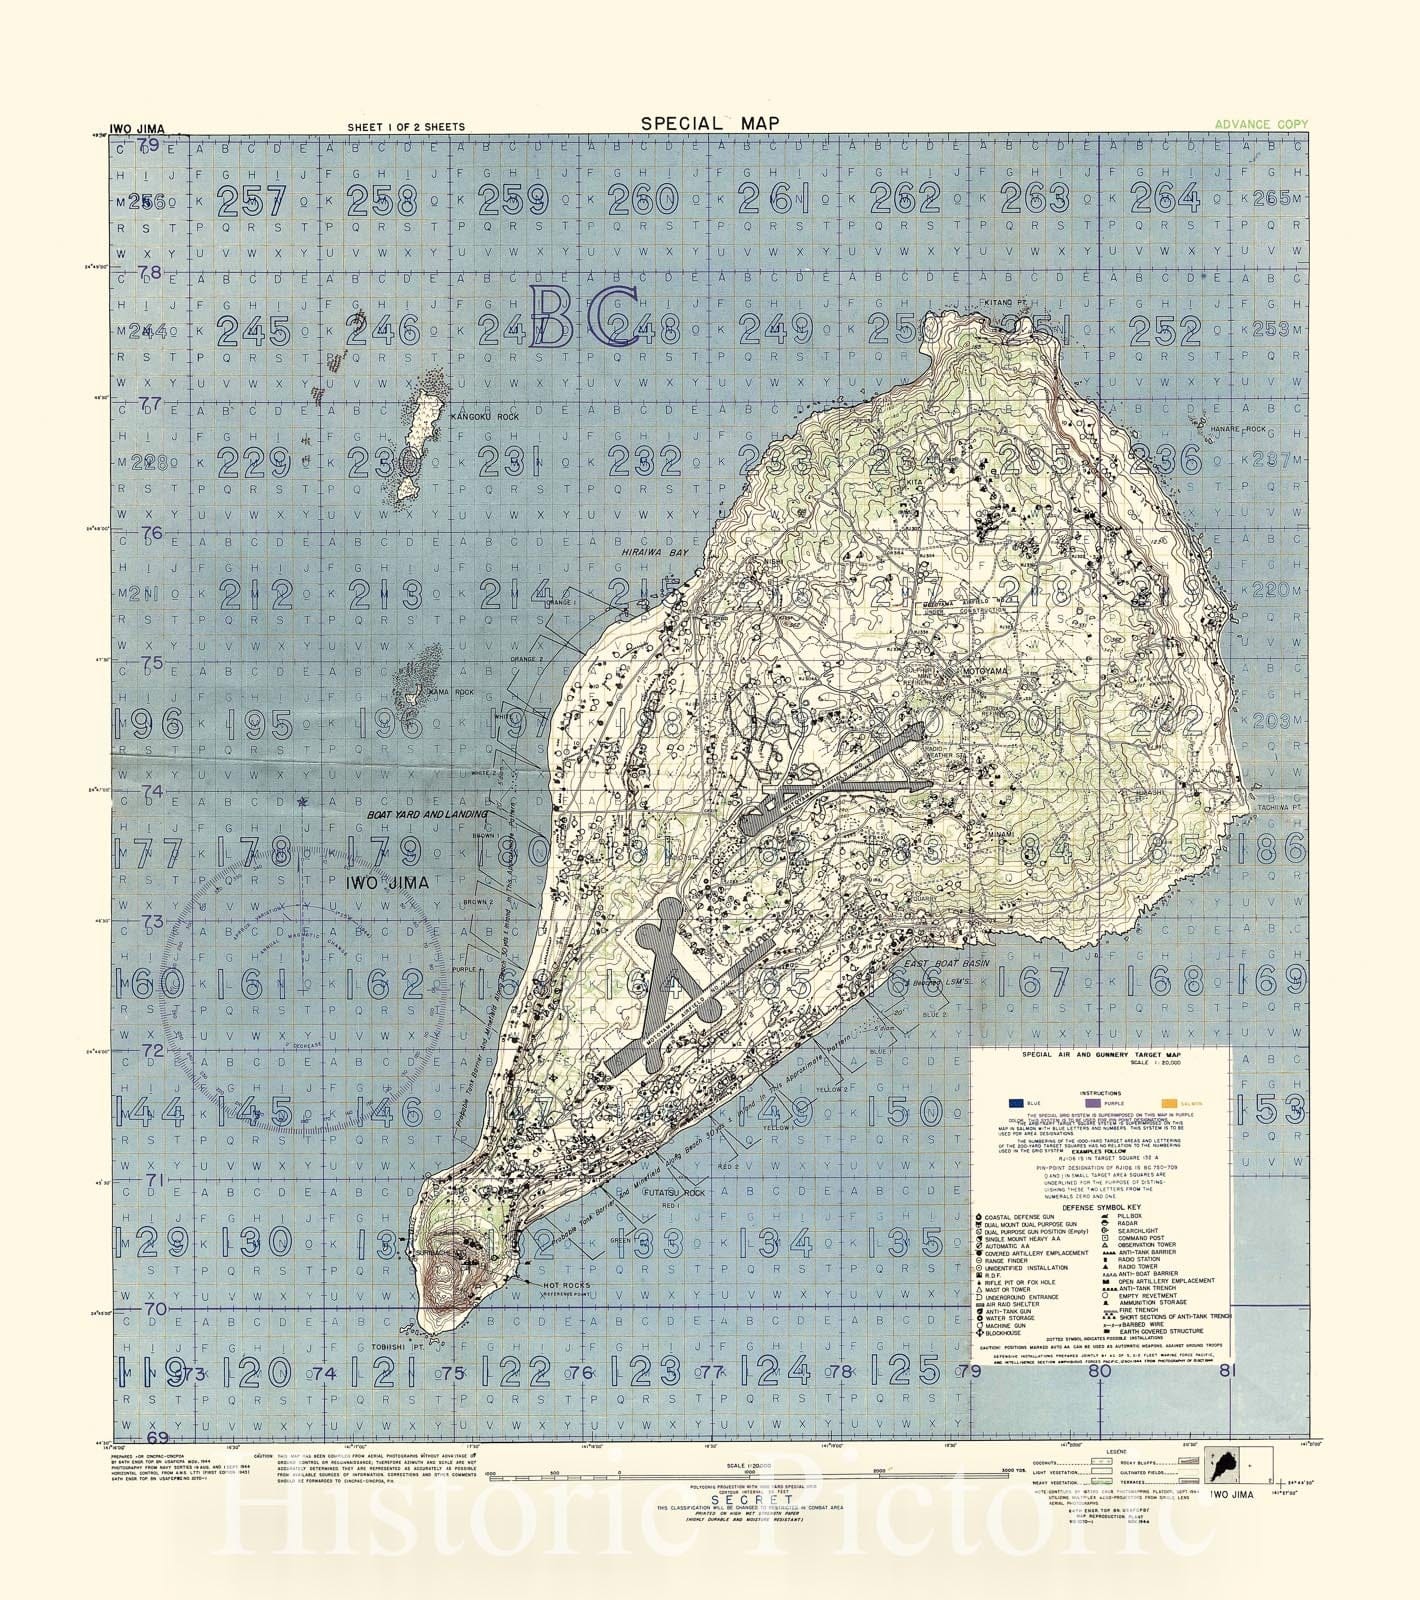 Historic Map : (Second World War - Iwo Jima) Special Air and Gunnery Target Map - Scale 1: 20,000, 1944, G-2 Section, 7th Division, Vintage Wall Art